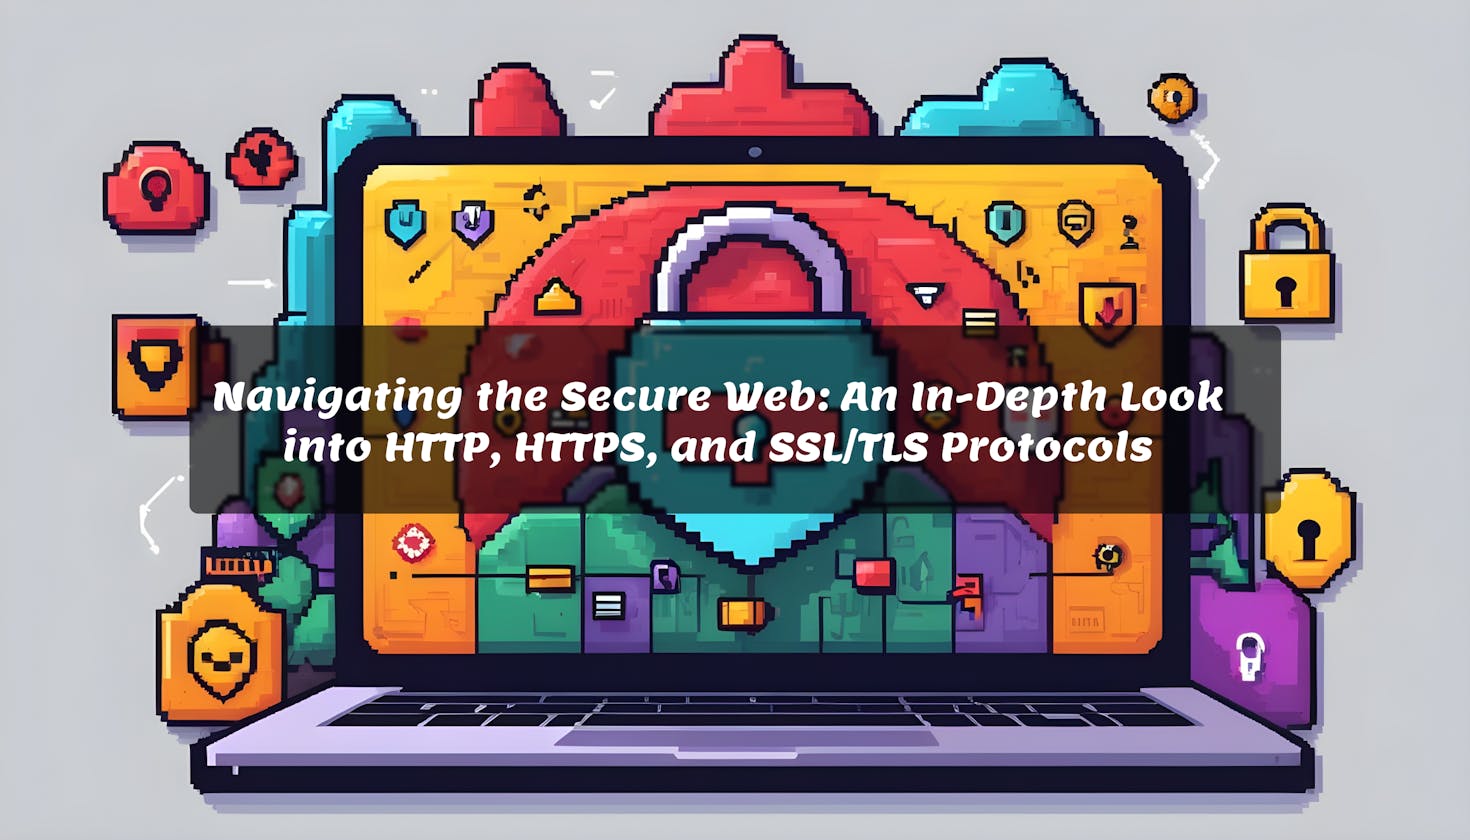 Navigating the Secure Web: An In-Depth Look into HTTP, HTTPS, and SSL/TLS Protocols